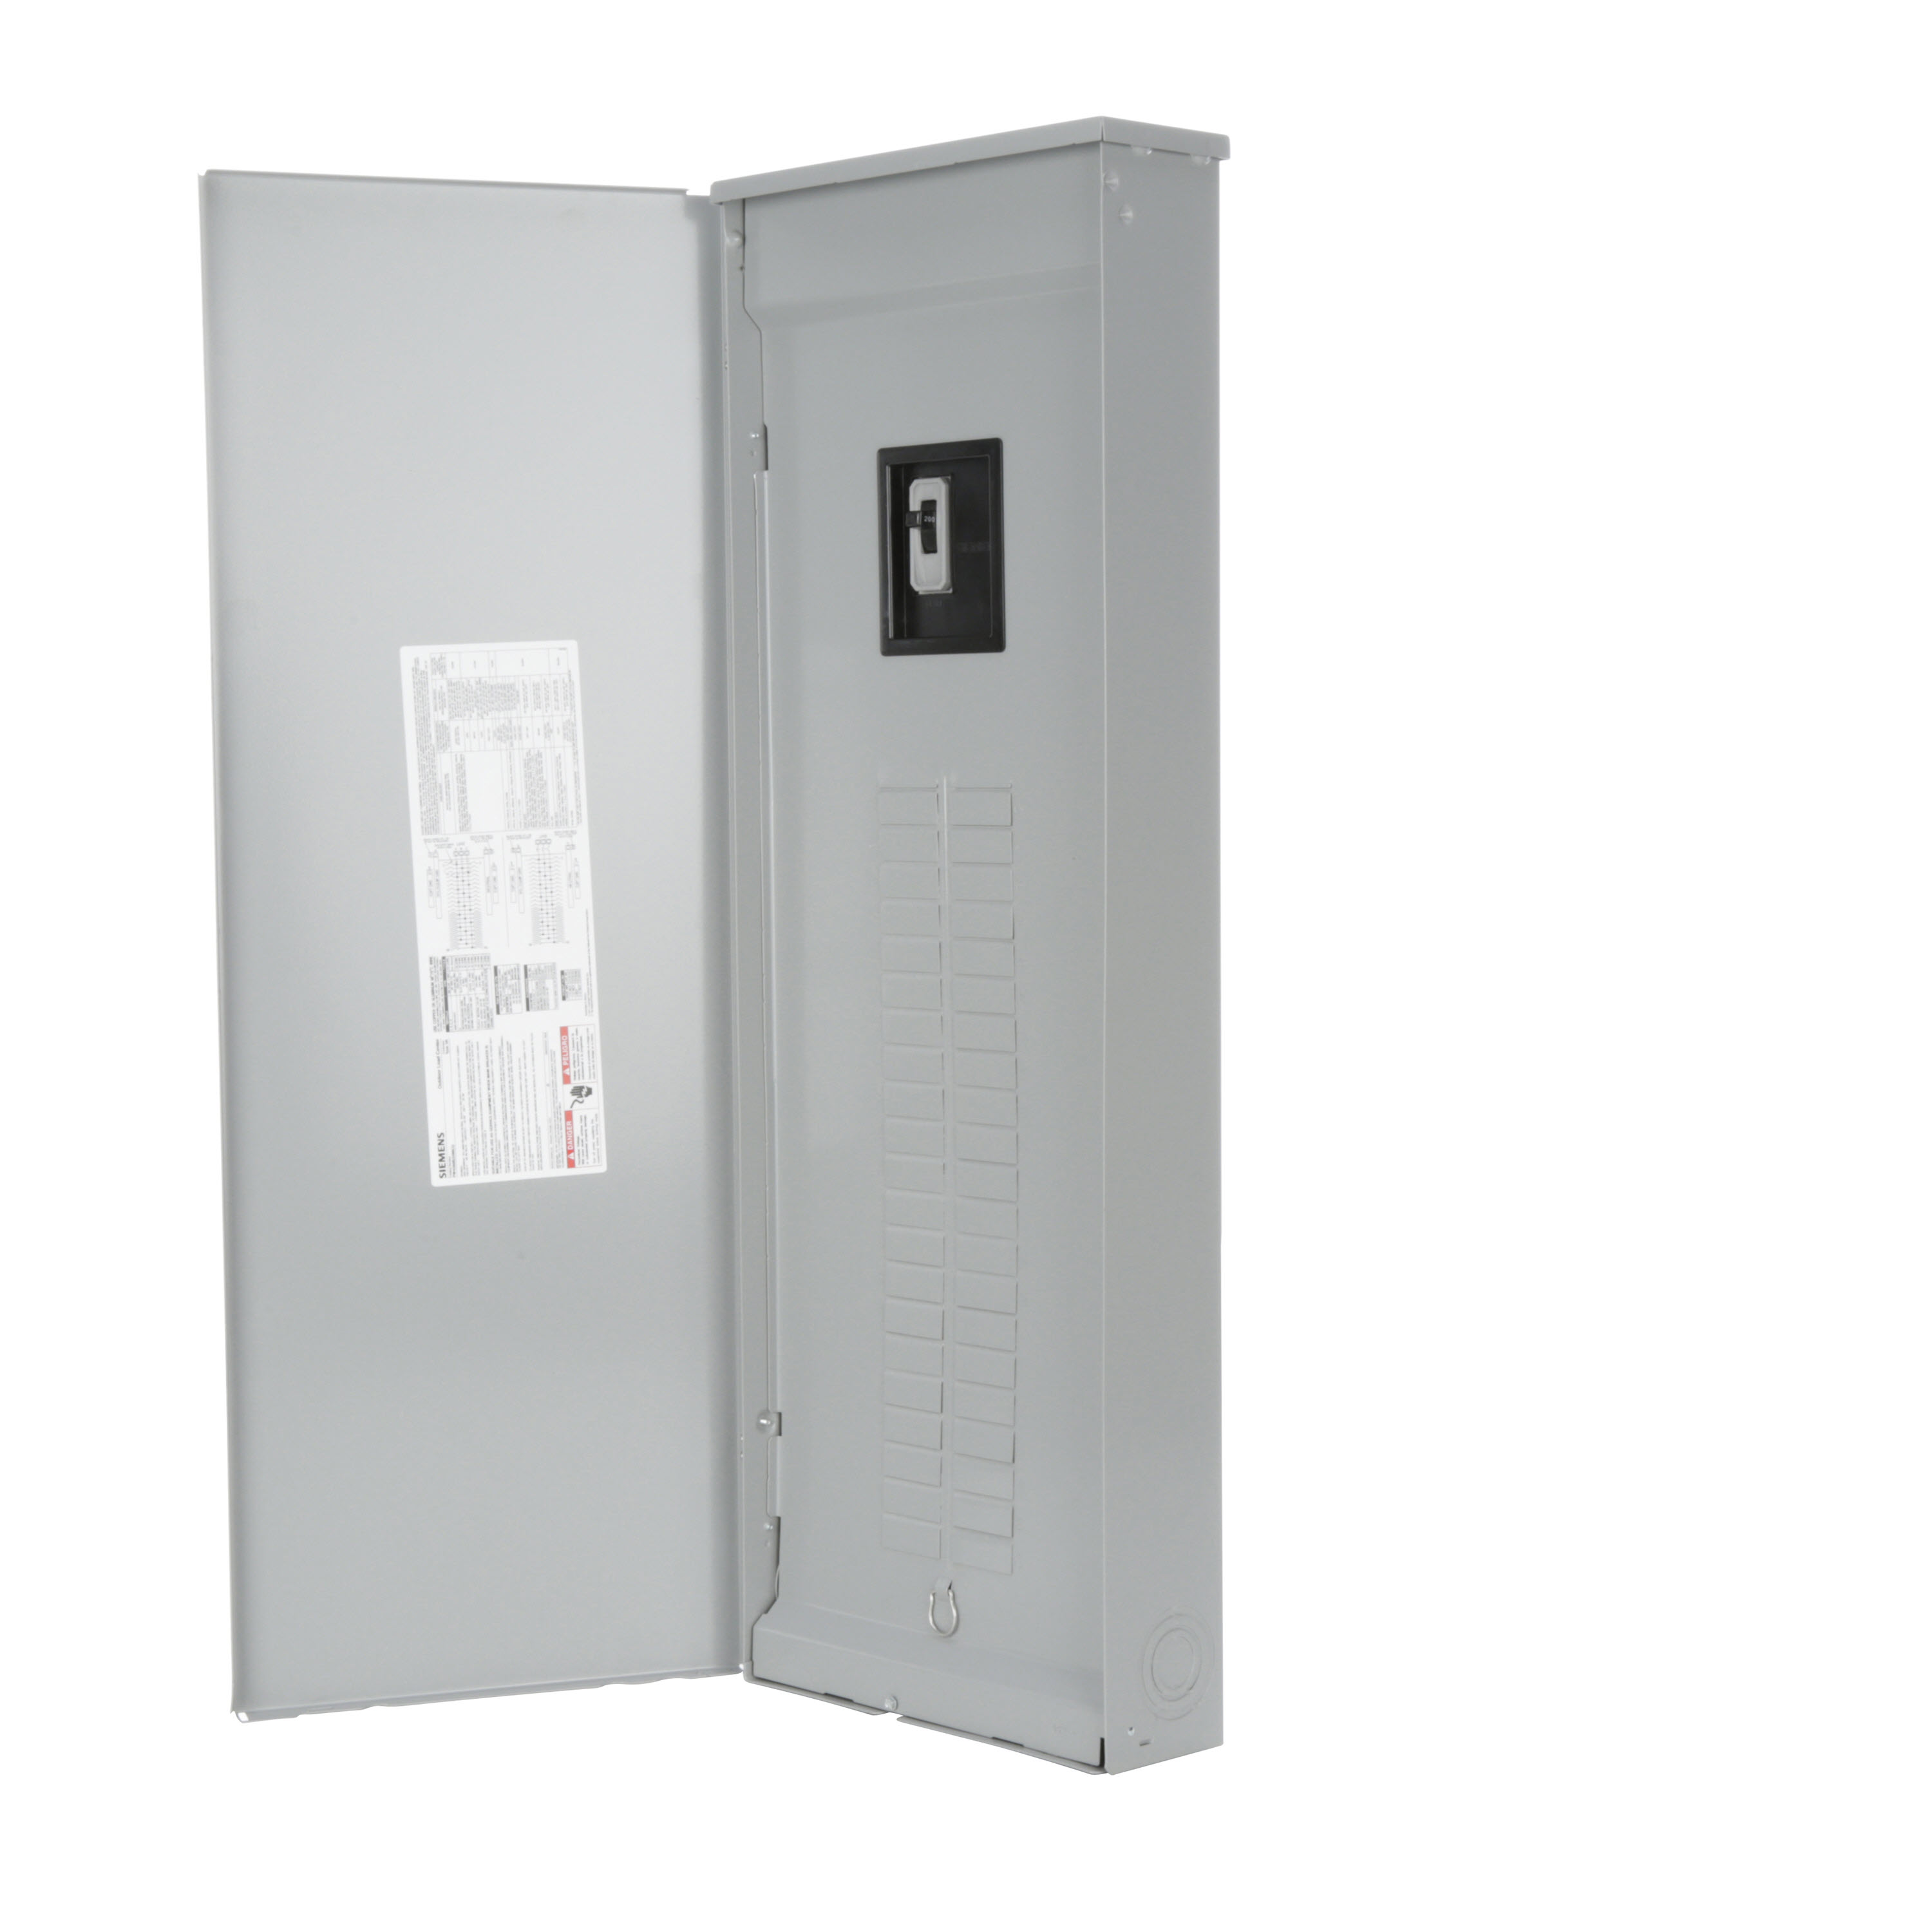 SIEMENS LOW VOLTAGE PL SERIES LOAD CENTER. FACTORY INSTALLED MAIN BREAKER WITH 42 1-INCH SPACES ALLOWING MAX 60 CIRCUITS. 3-PHASE 4-WIRE SYSTEM RATED 120/240V OR 120/208V (200A) 22KA INTERRUPT. SPECIAL FEATURES COPPER BUS, INTERCHANGEABLE MAIN, GRAY TRIM, NEMA TYPE3R ENCLOSURE FOR OUTDOOR USE.